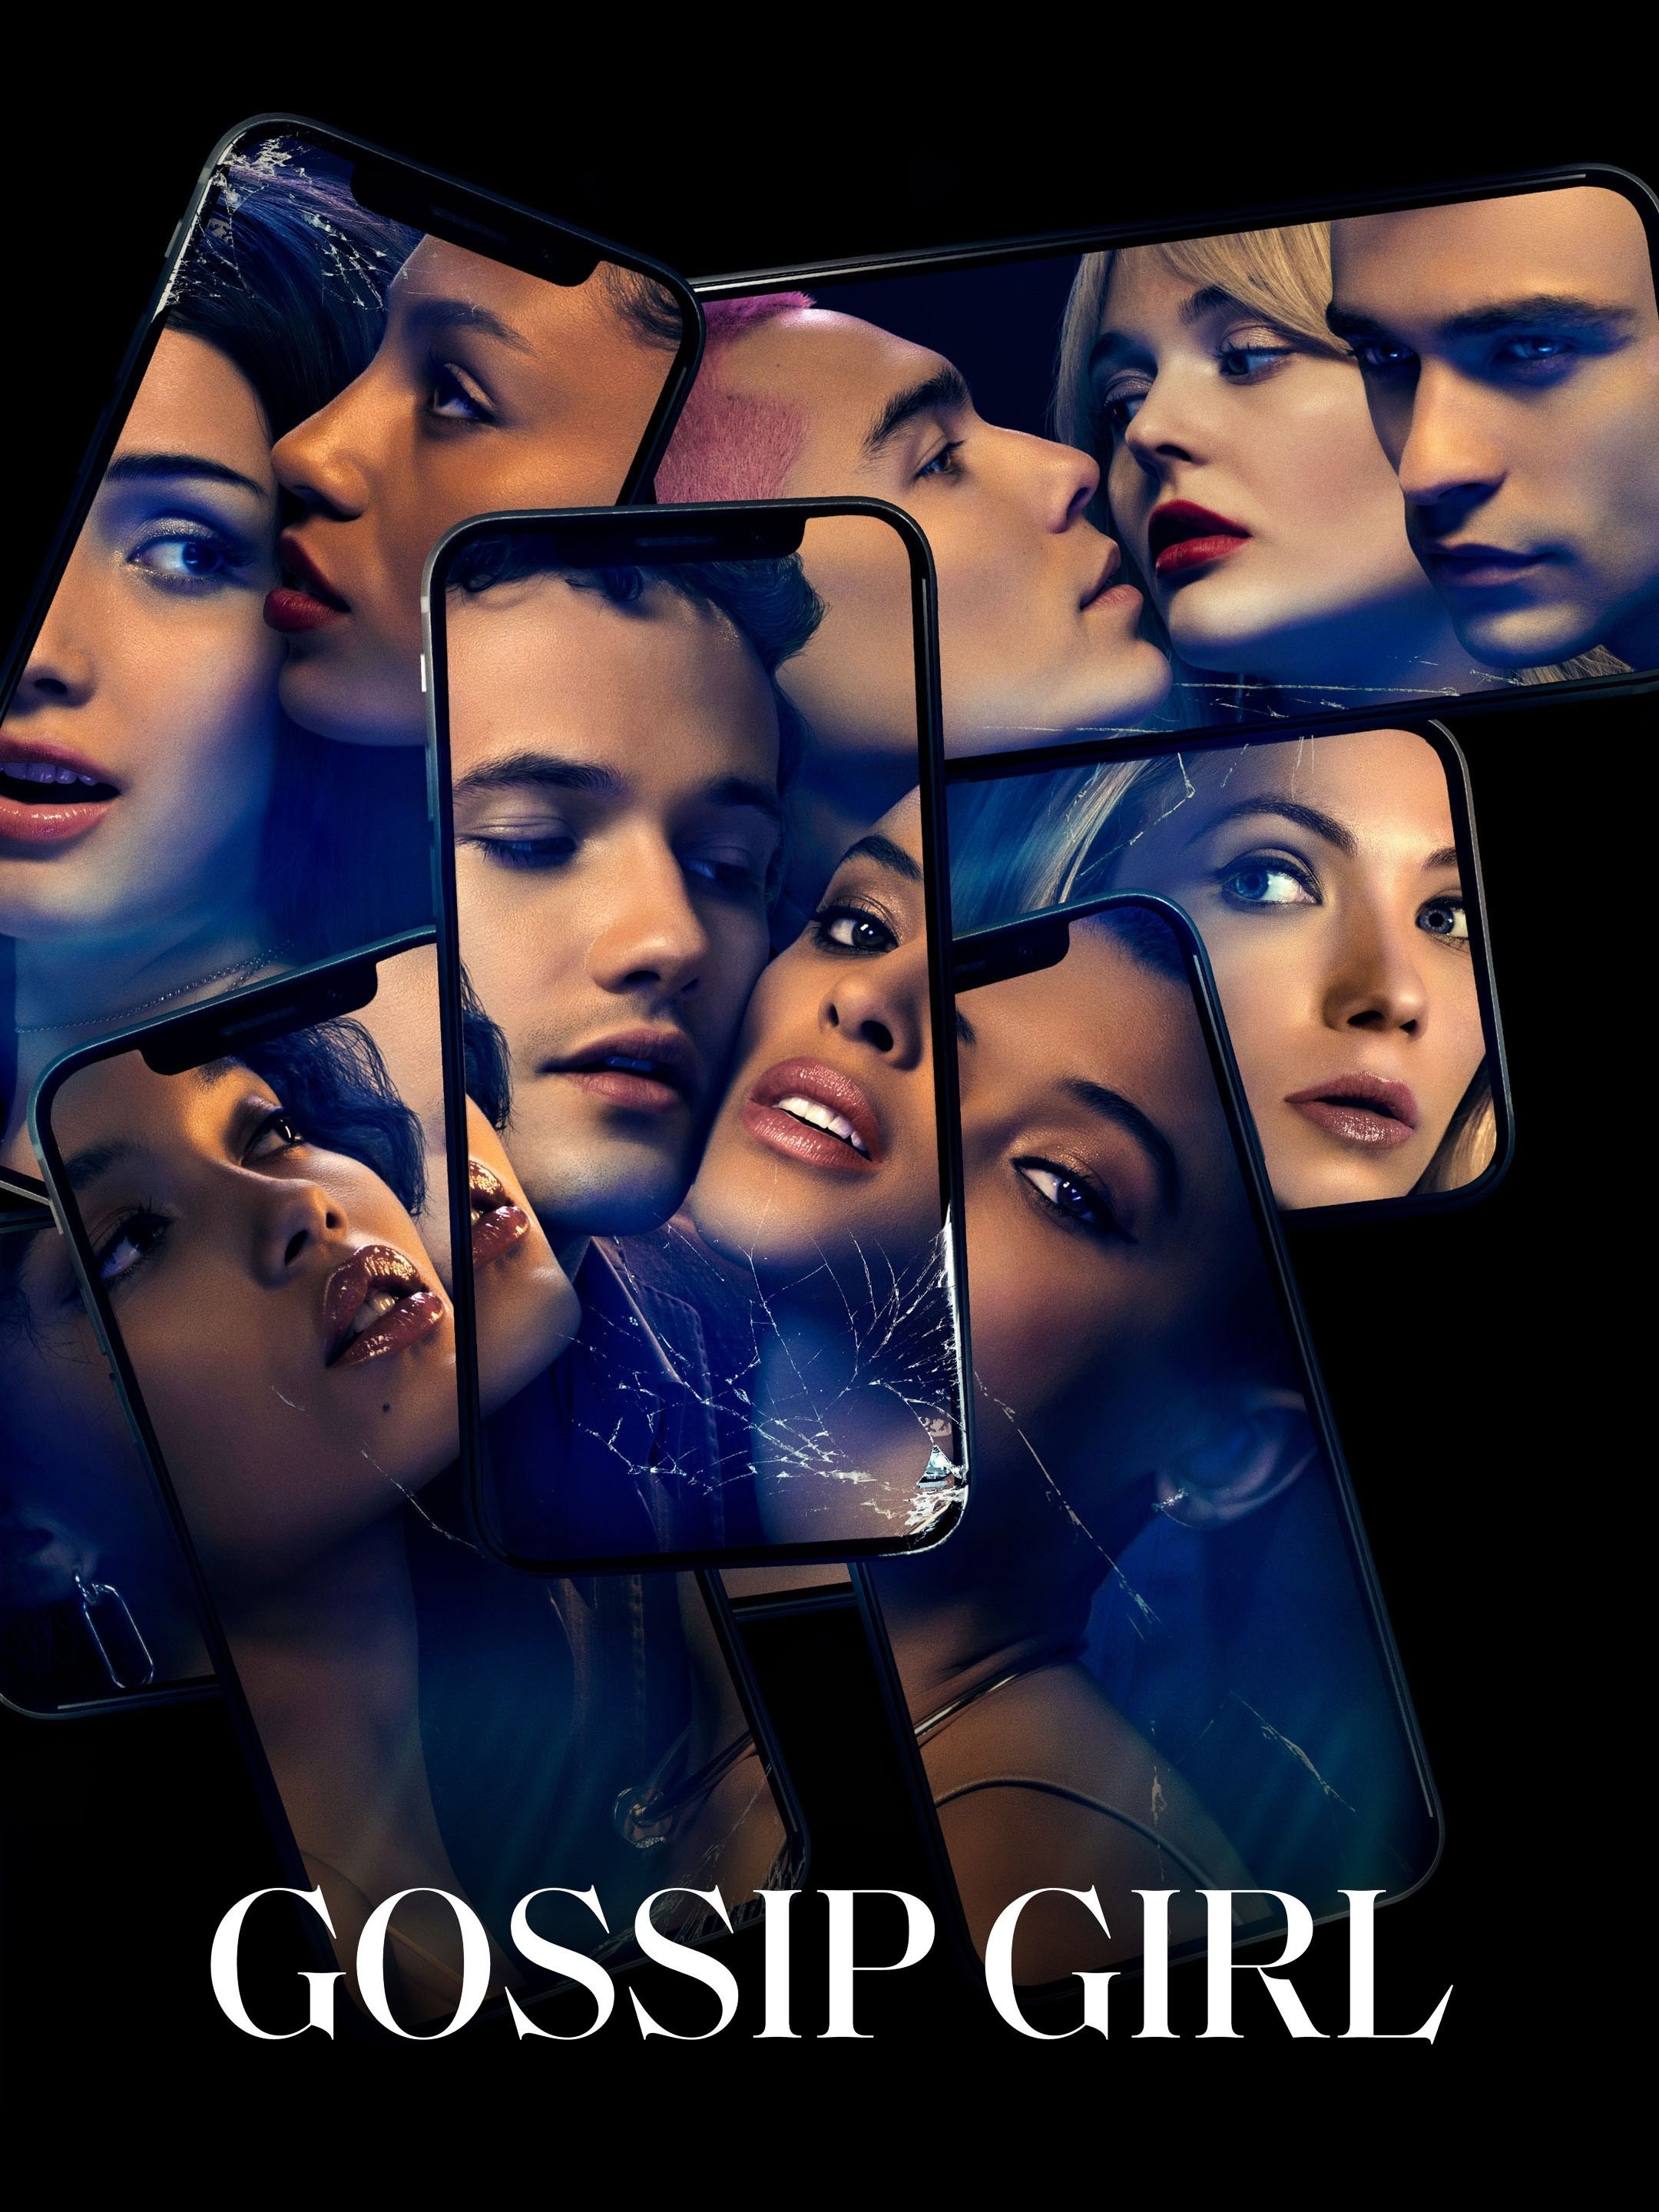 Gossip Girl' Season 1: Recap And Ending - Things To Know Before